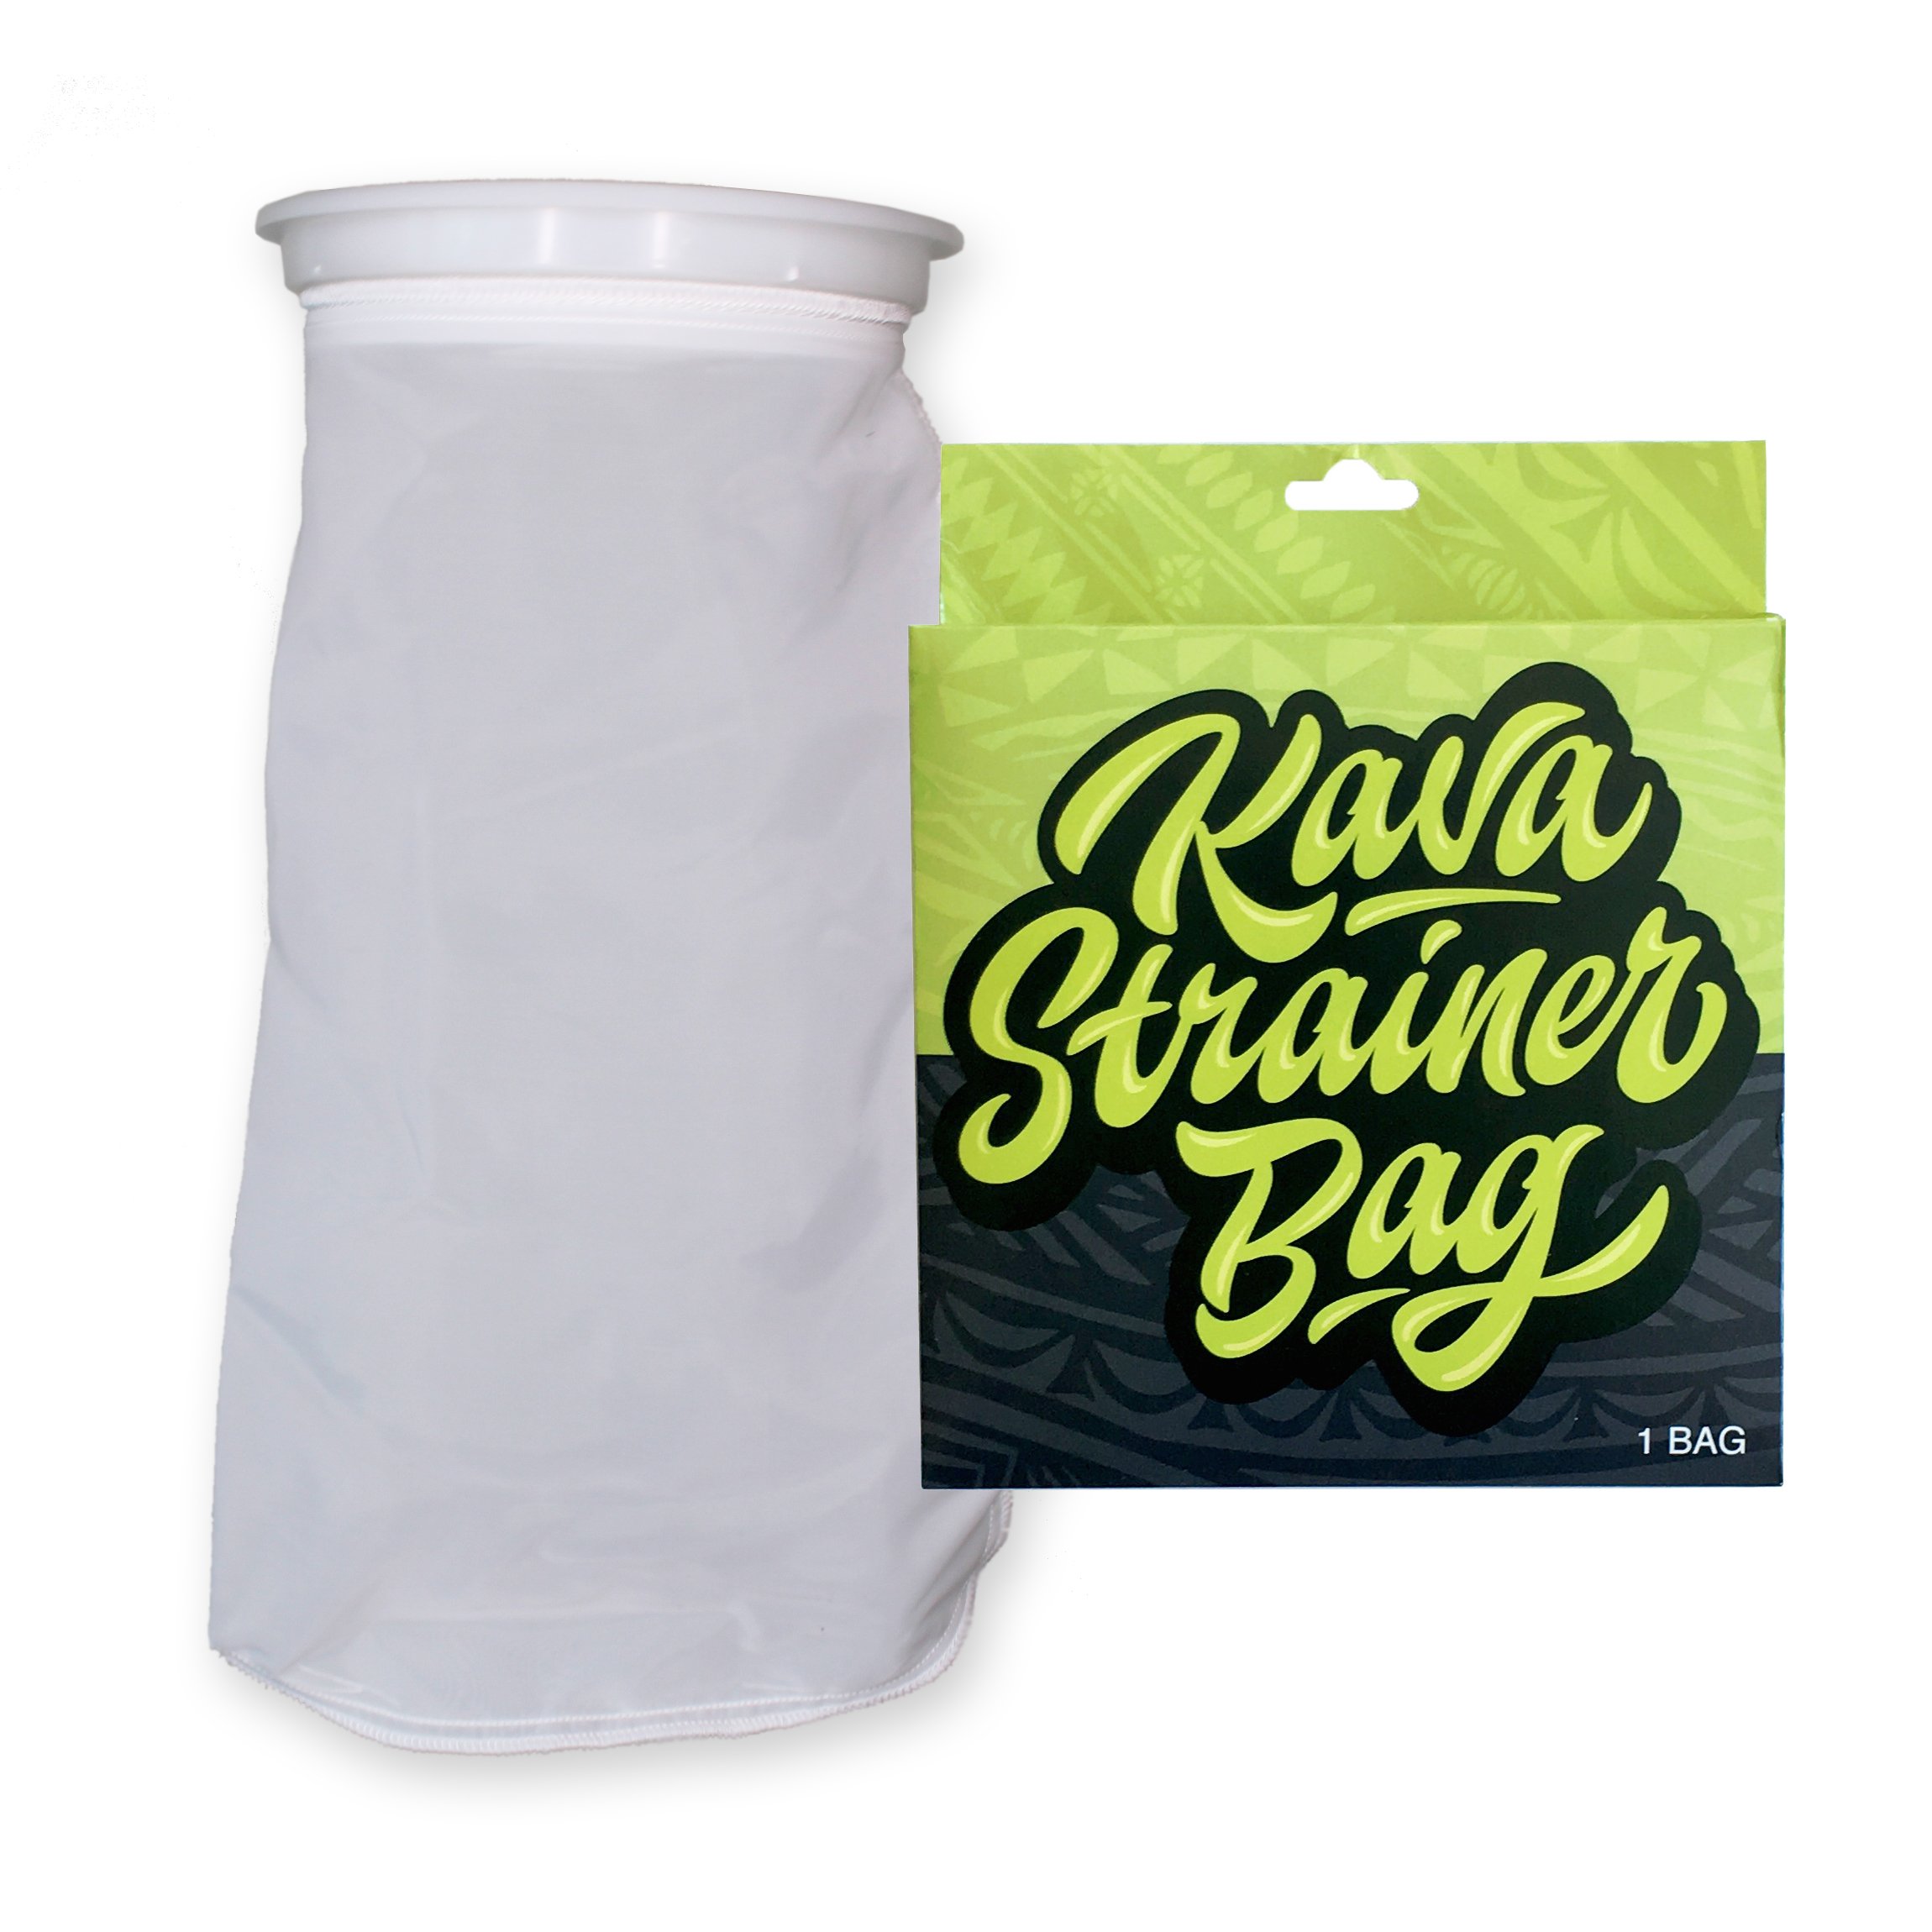 Jelly Strainer Bag – The Soap Dispensary and Kitchen Staples